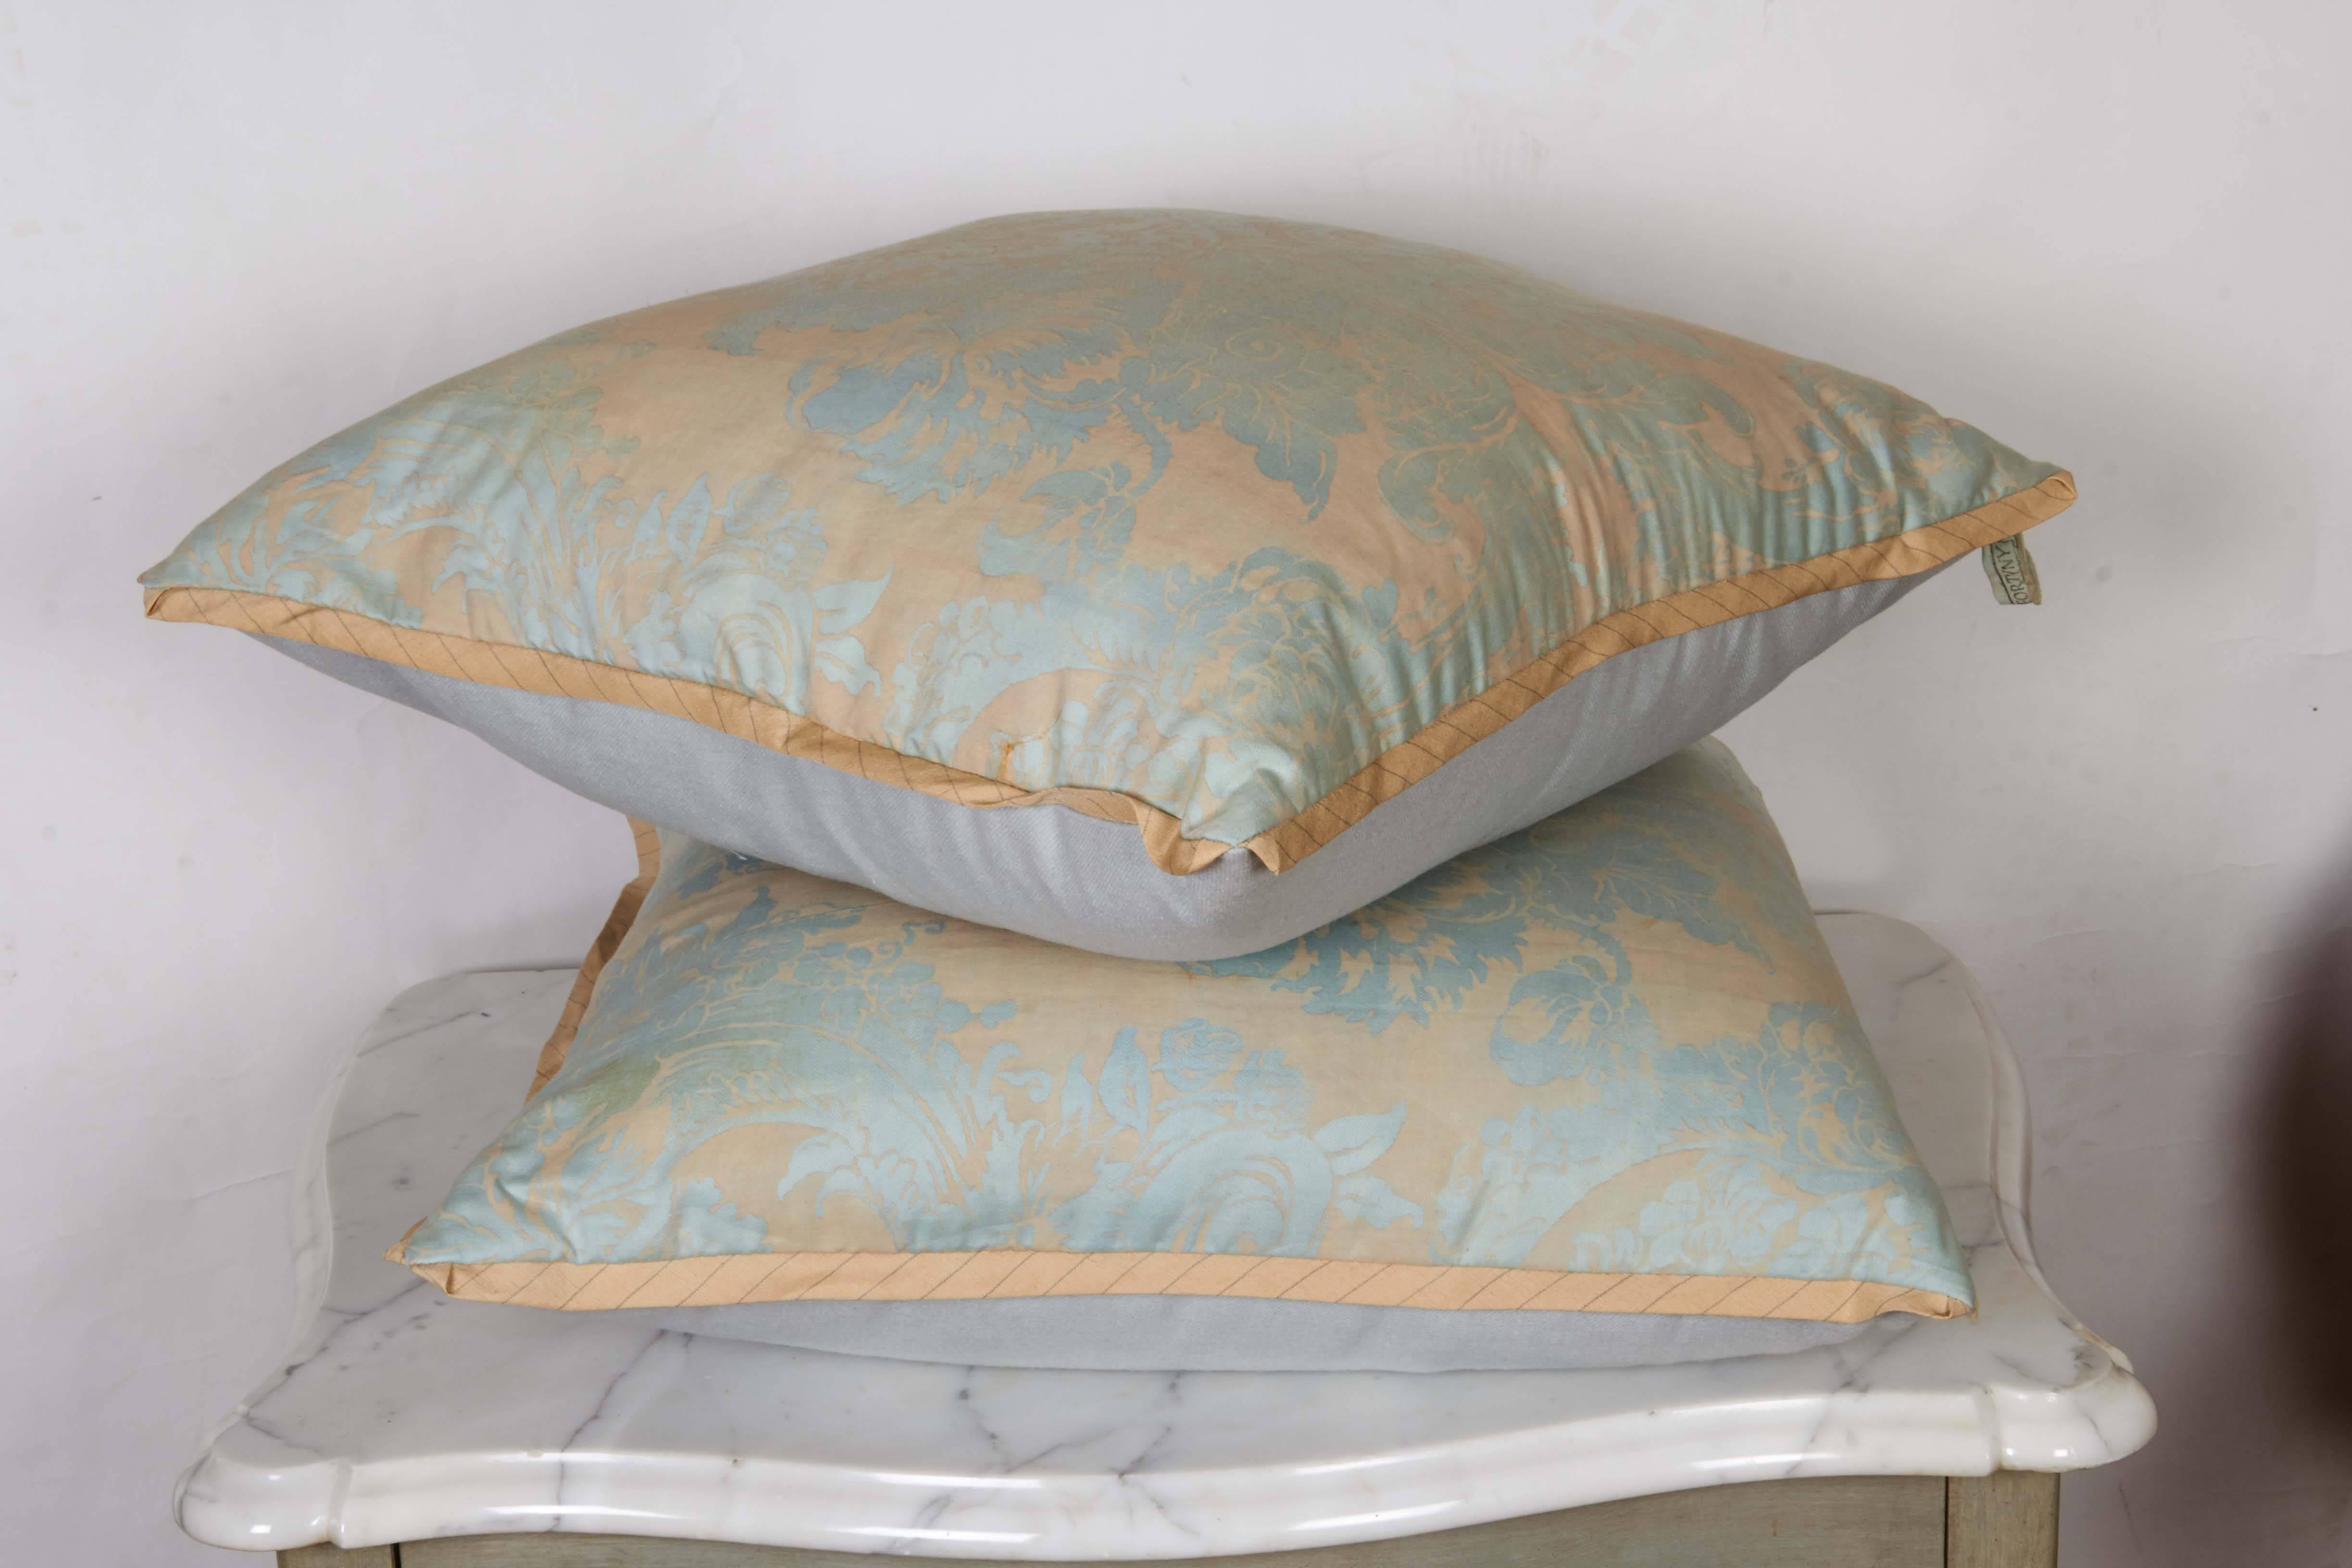 Rococo A Set of Fortuny Fabric Cushions in the Dandolo Pattern 